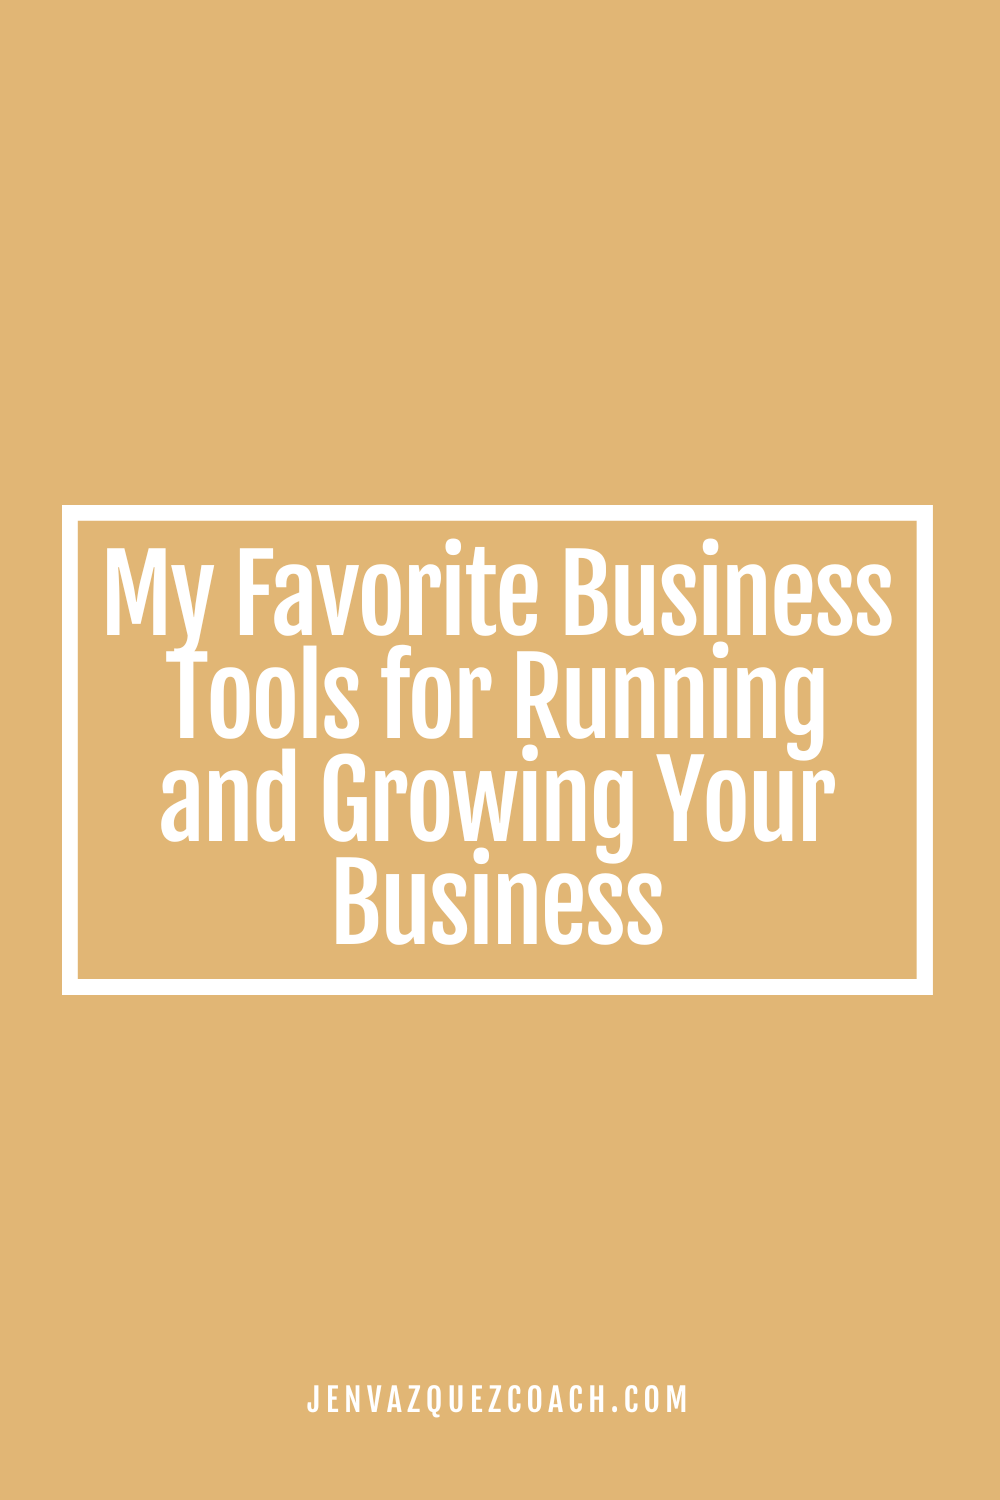 My Favorite Business Tools for Running and Growing Your BusinessMy Favorite Business Tools for Running and Growing Your Business 